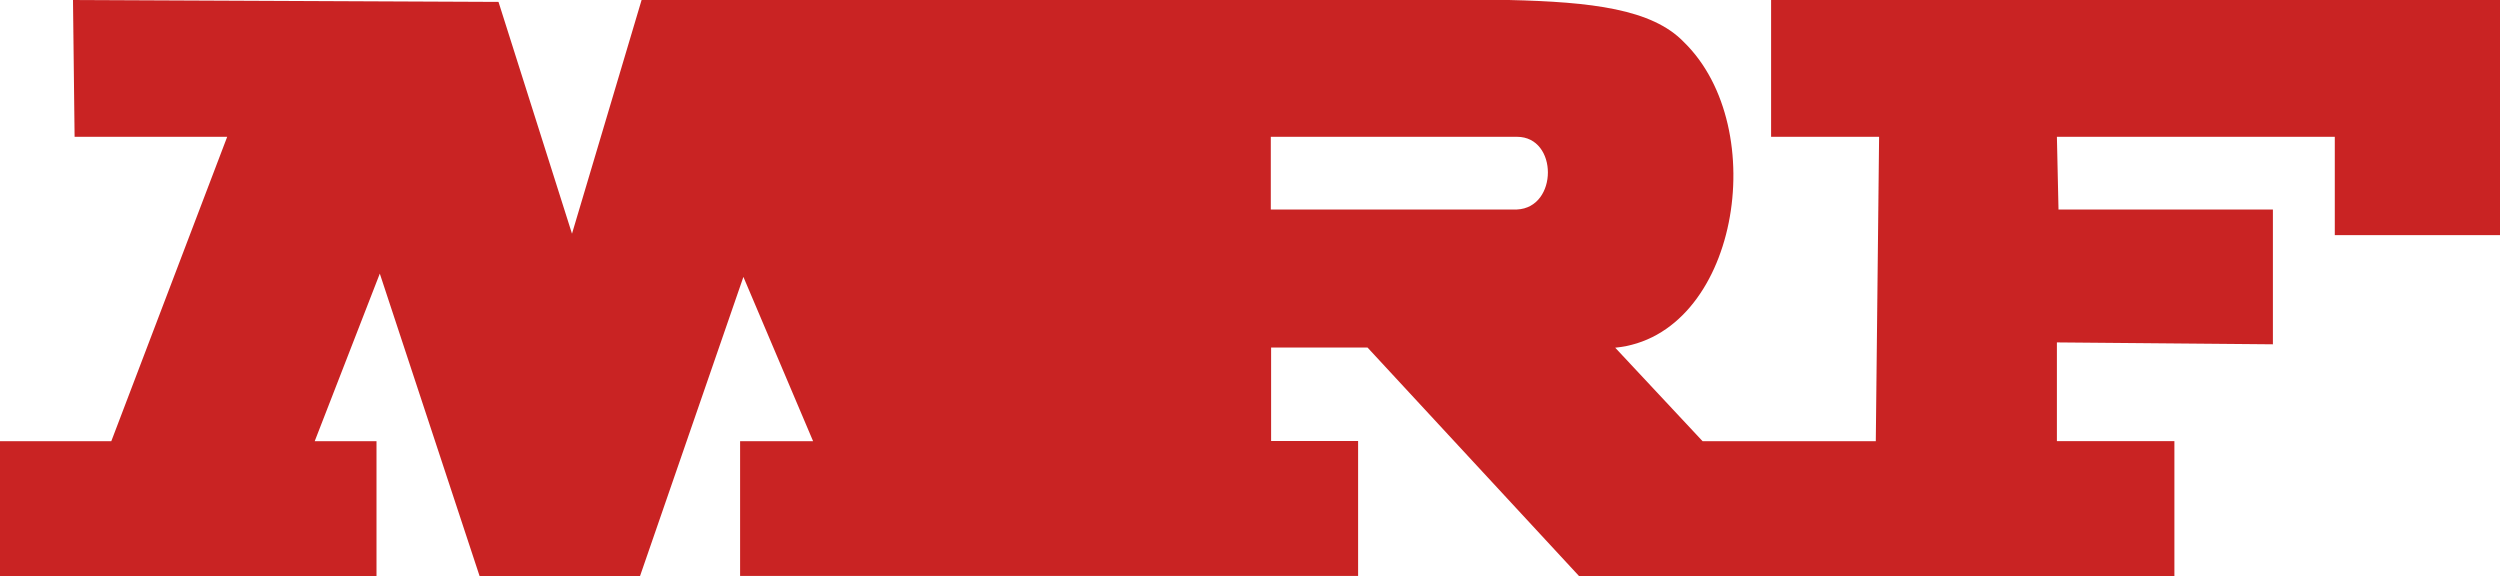 Madras Rubber Factory Limited (MRF) logo colors